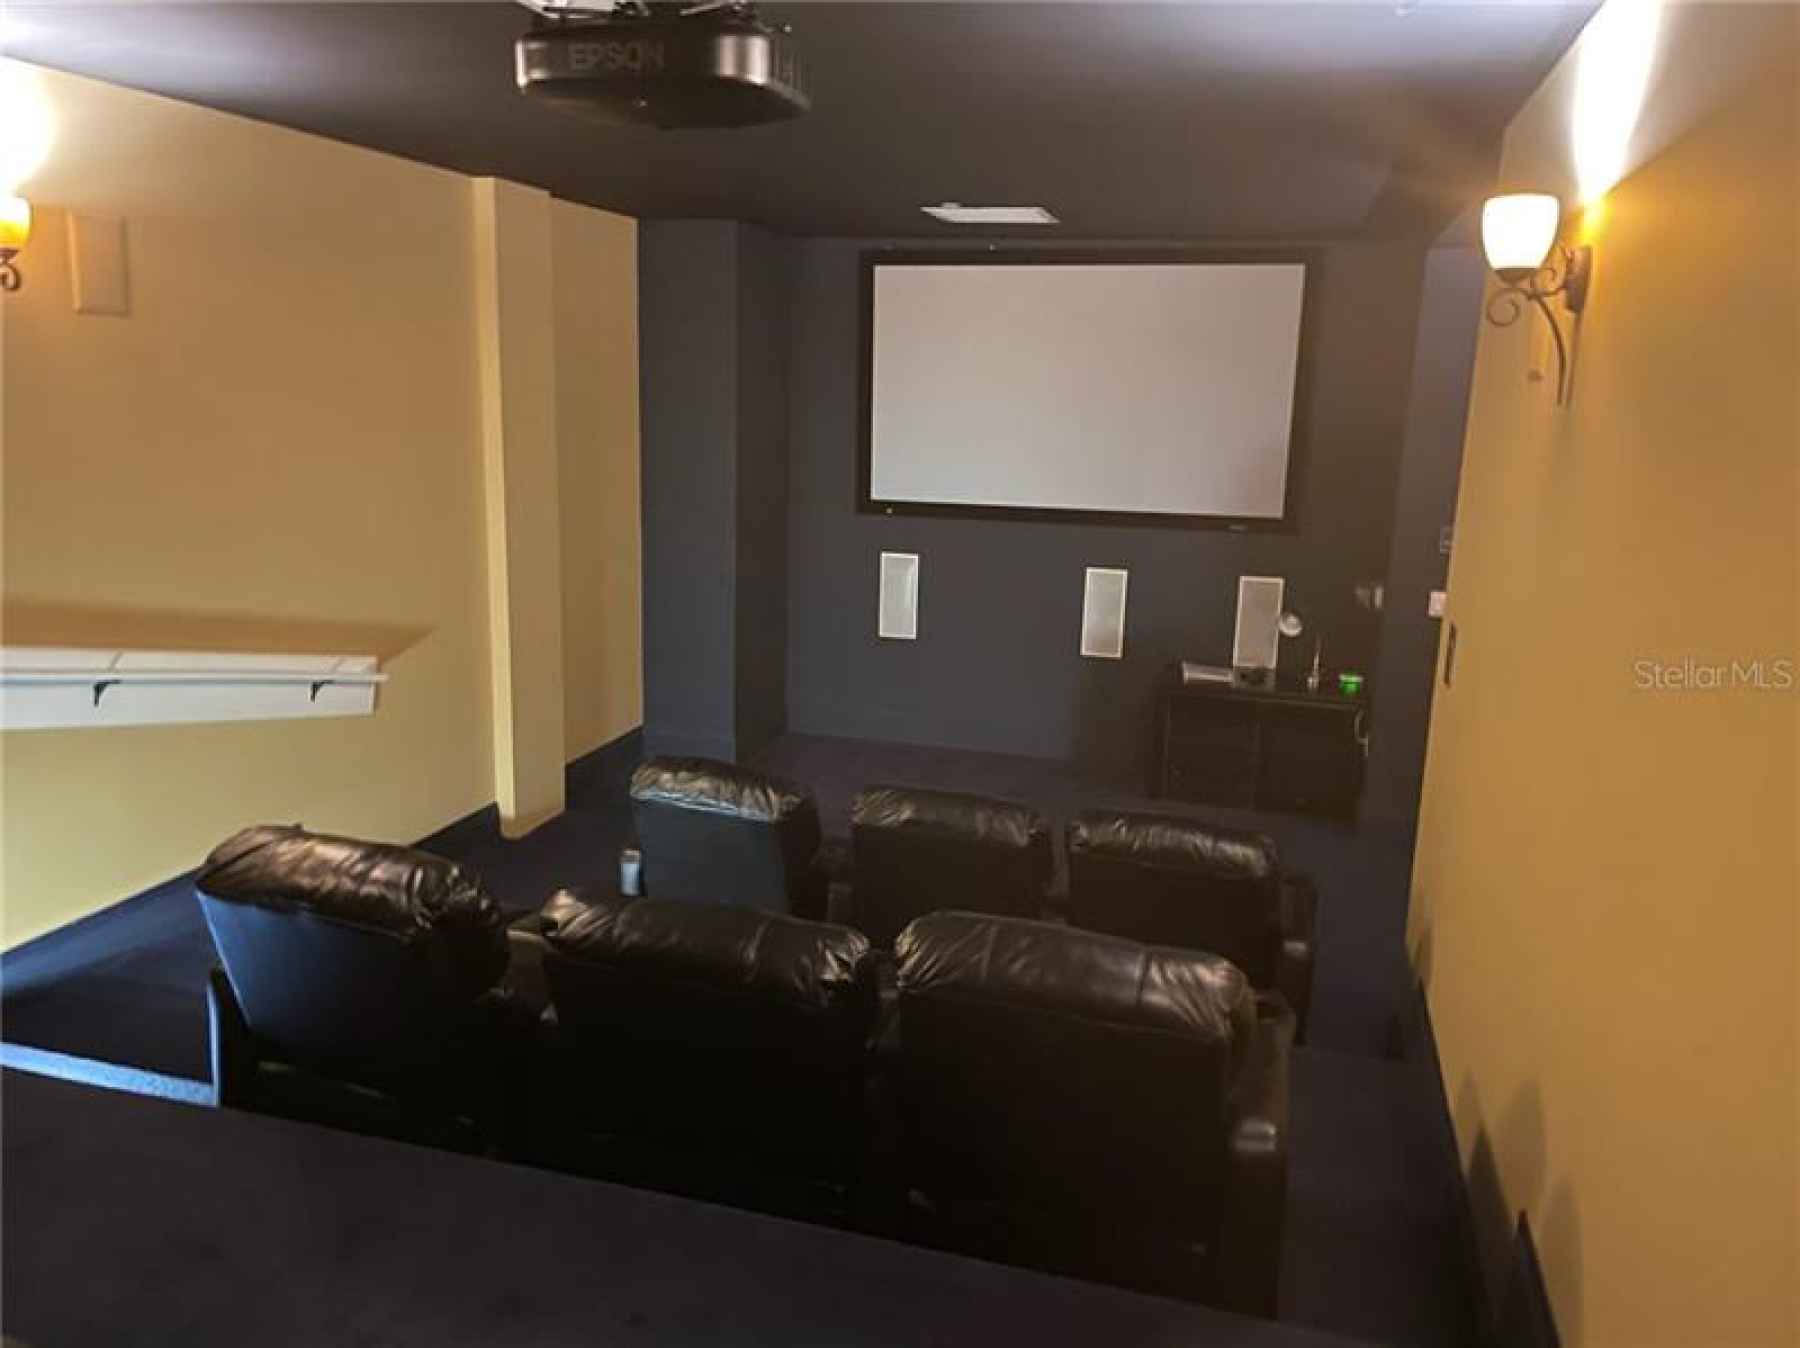 Theatre room. for rent located on lobby floor